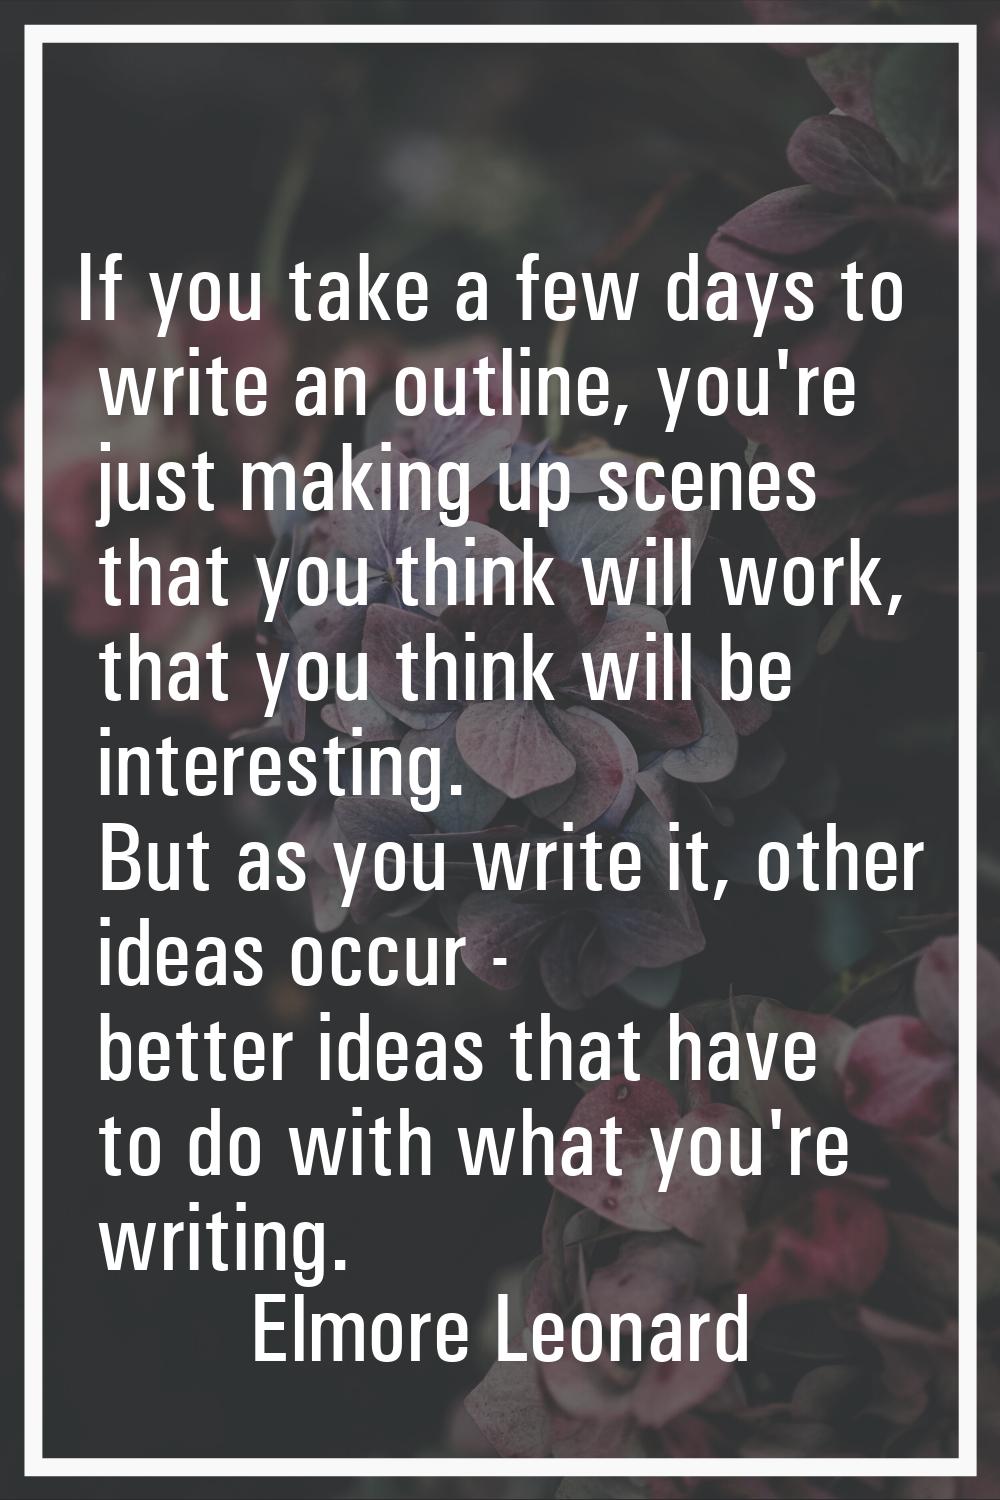 If you take a few days to write an outline, you're just making up scenes that you think will work, 